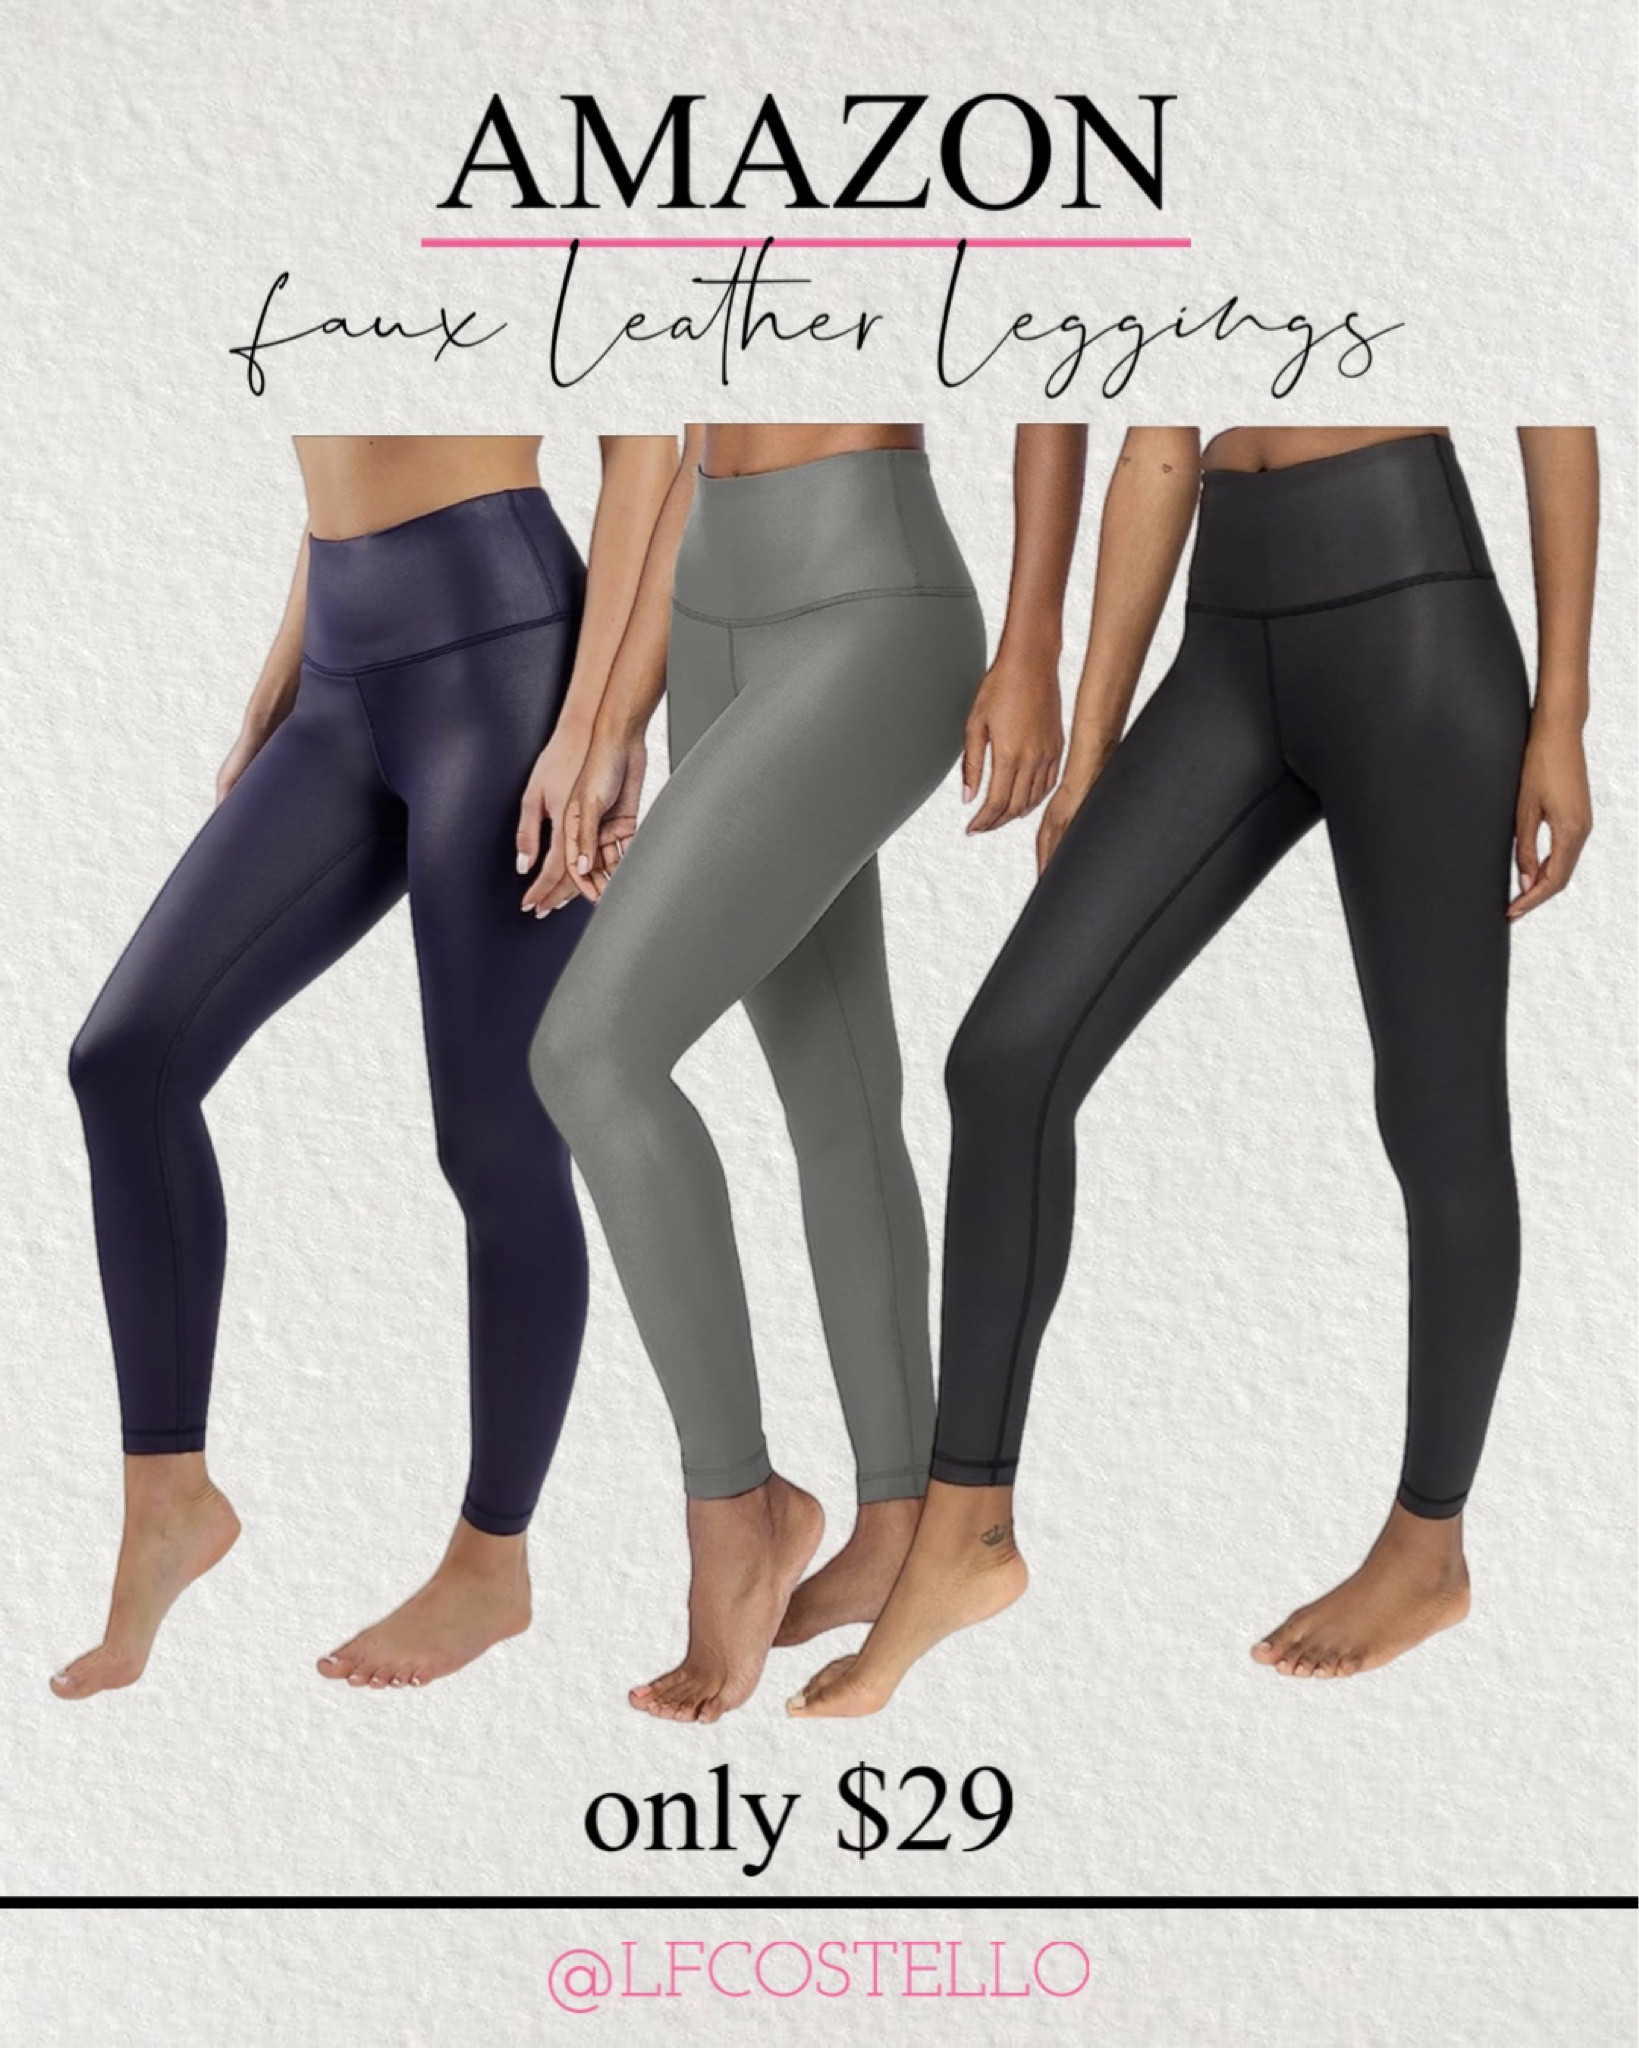 SPANX Seamless Leggings for Women Tummy Control : Buy Online at Best Price  in KSA - Souq is now : Spanx: Fashion